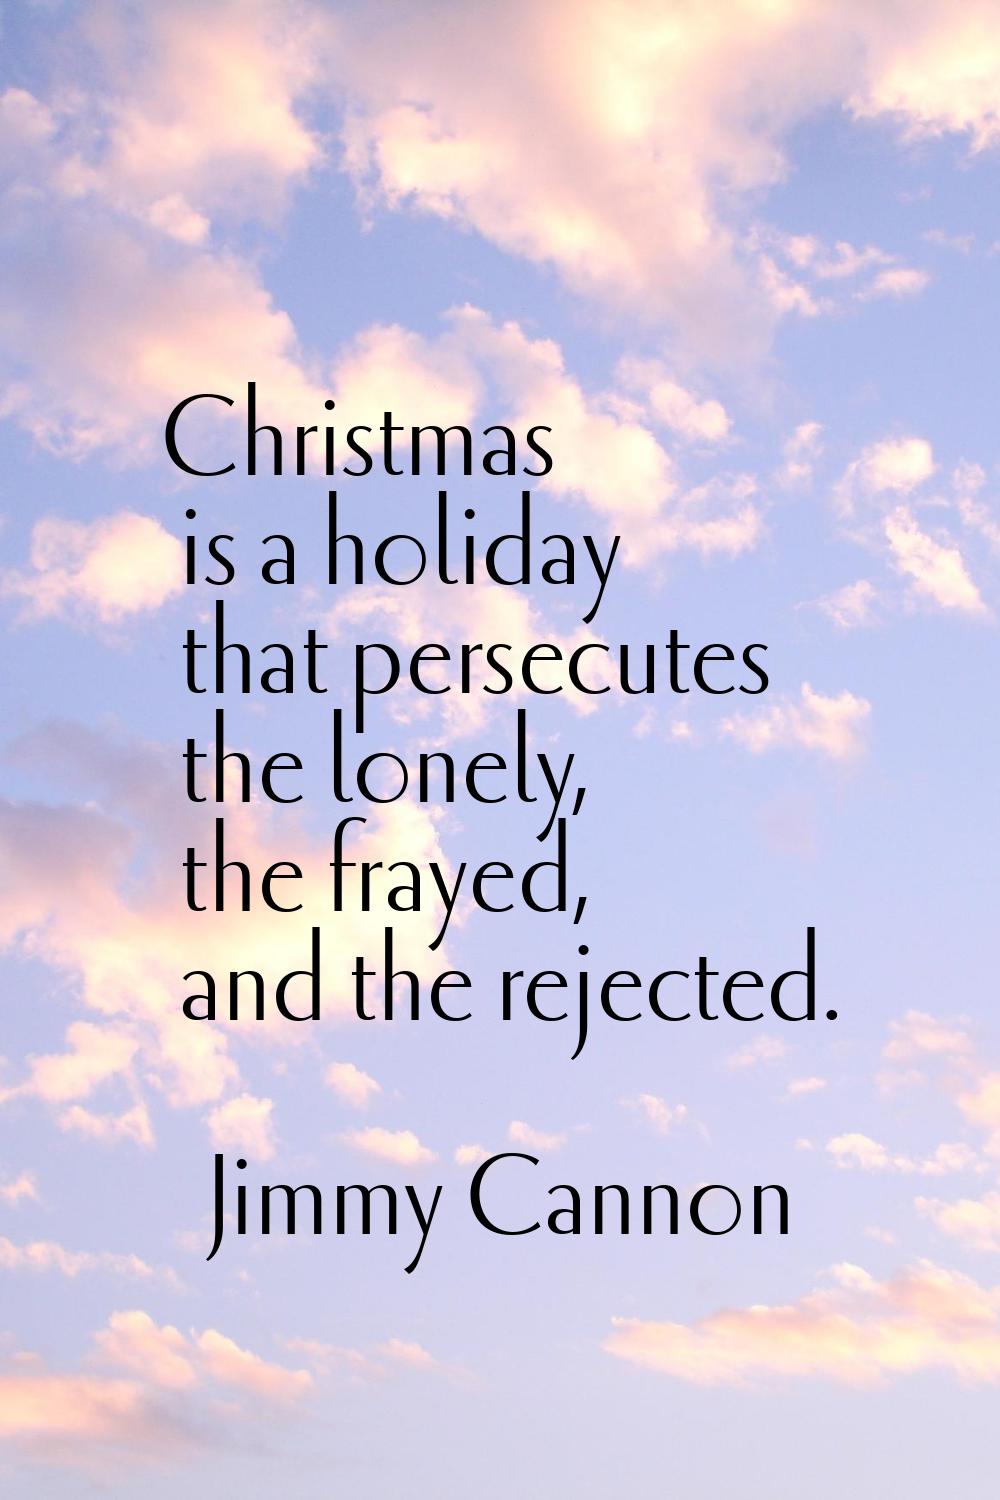 Christmas is a holiday that persecutes the lonely, the frayed, and the rejected.